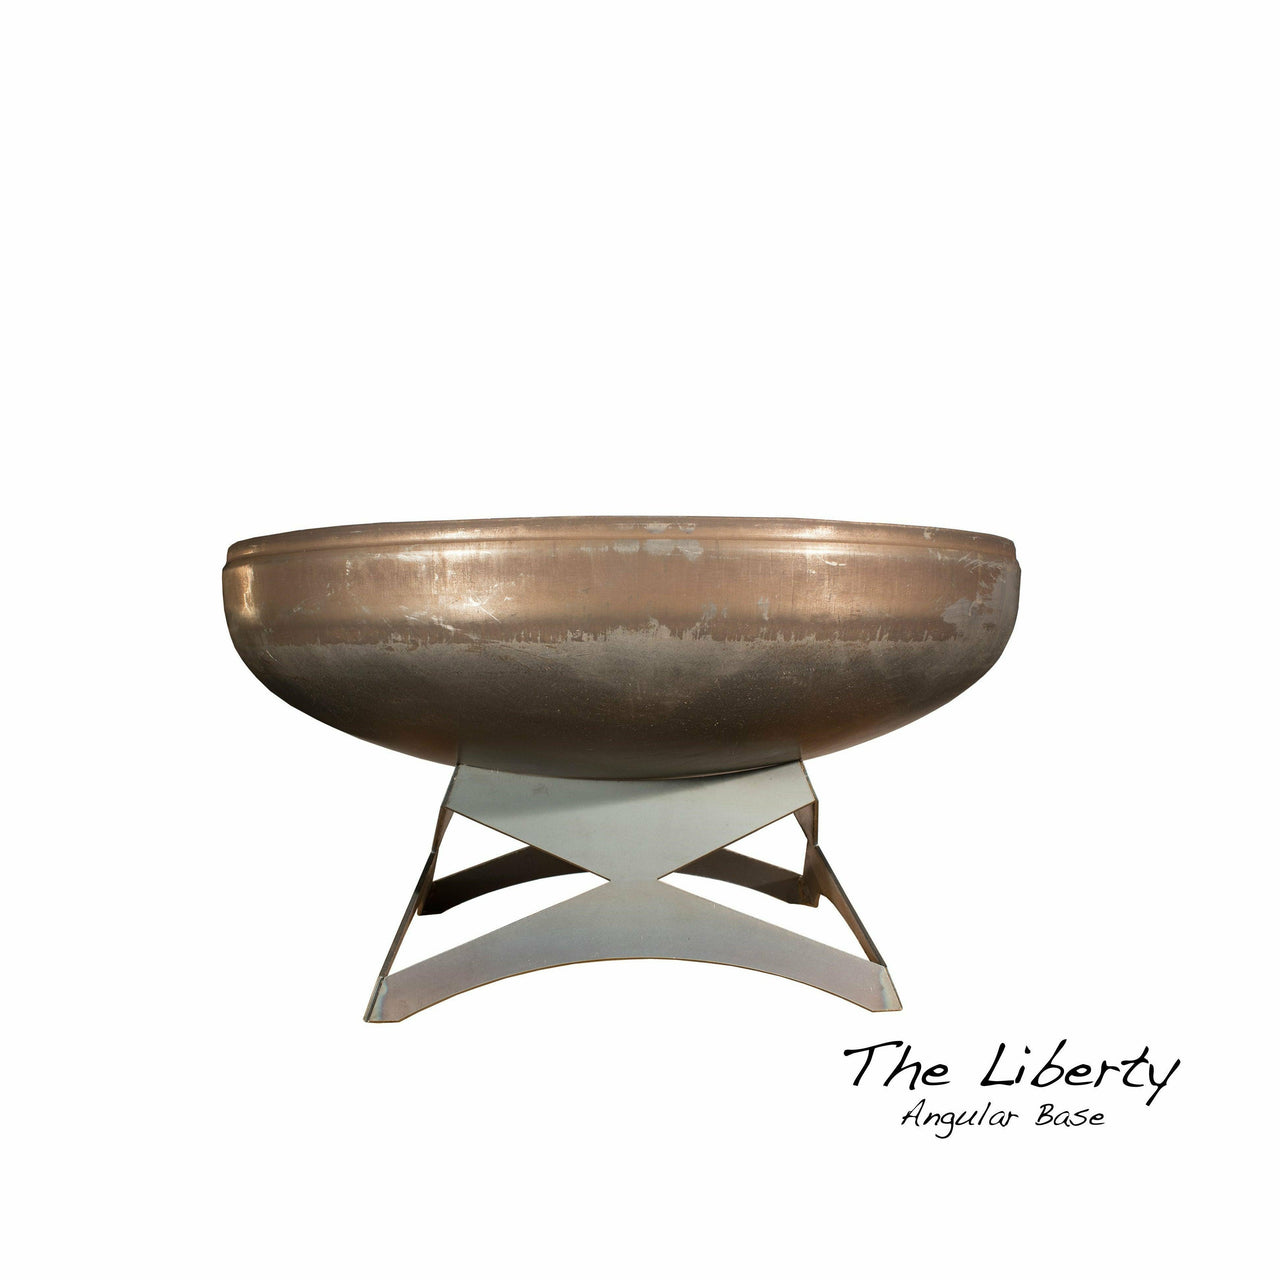 Ohio Flame Liberty Fire Pit with Angular Base - Fire Pit Stock